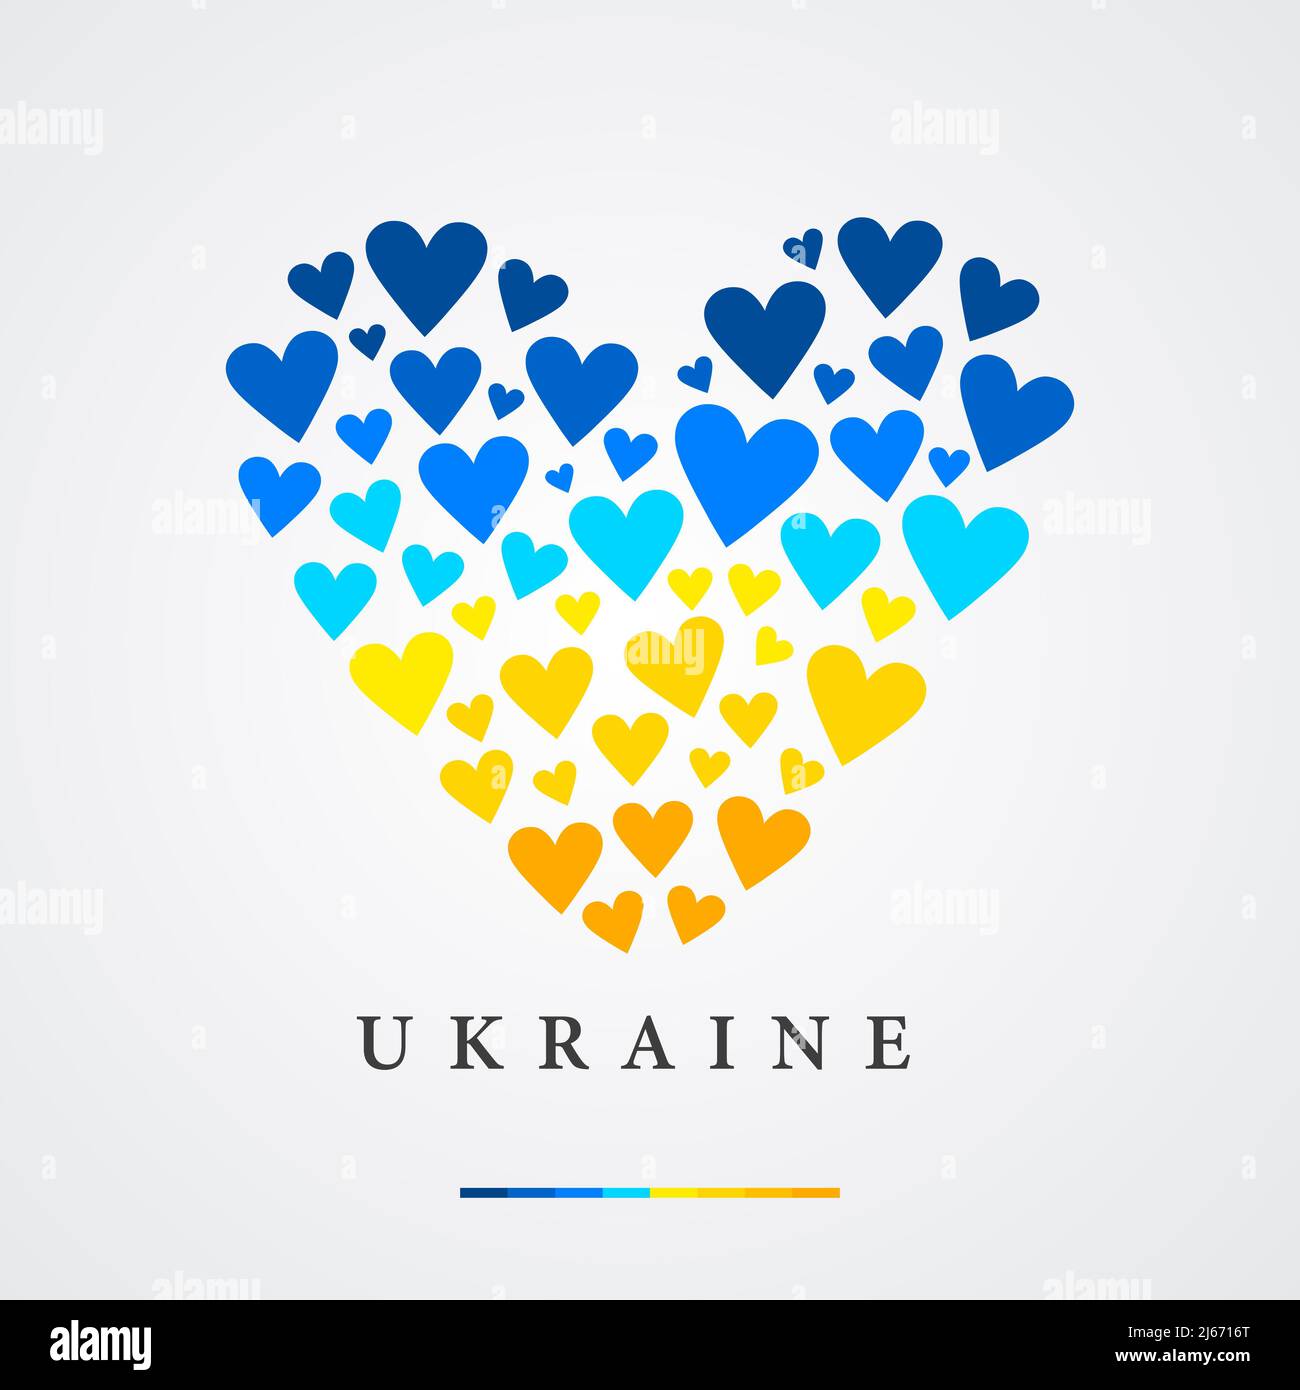 Heart made of small hearts painted in the colors of the flag of Ukraine. Vector illustration Stock Photo